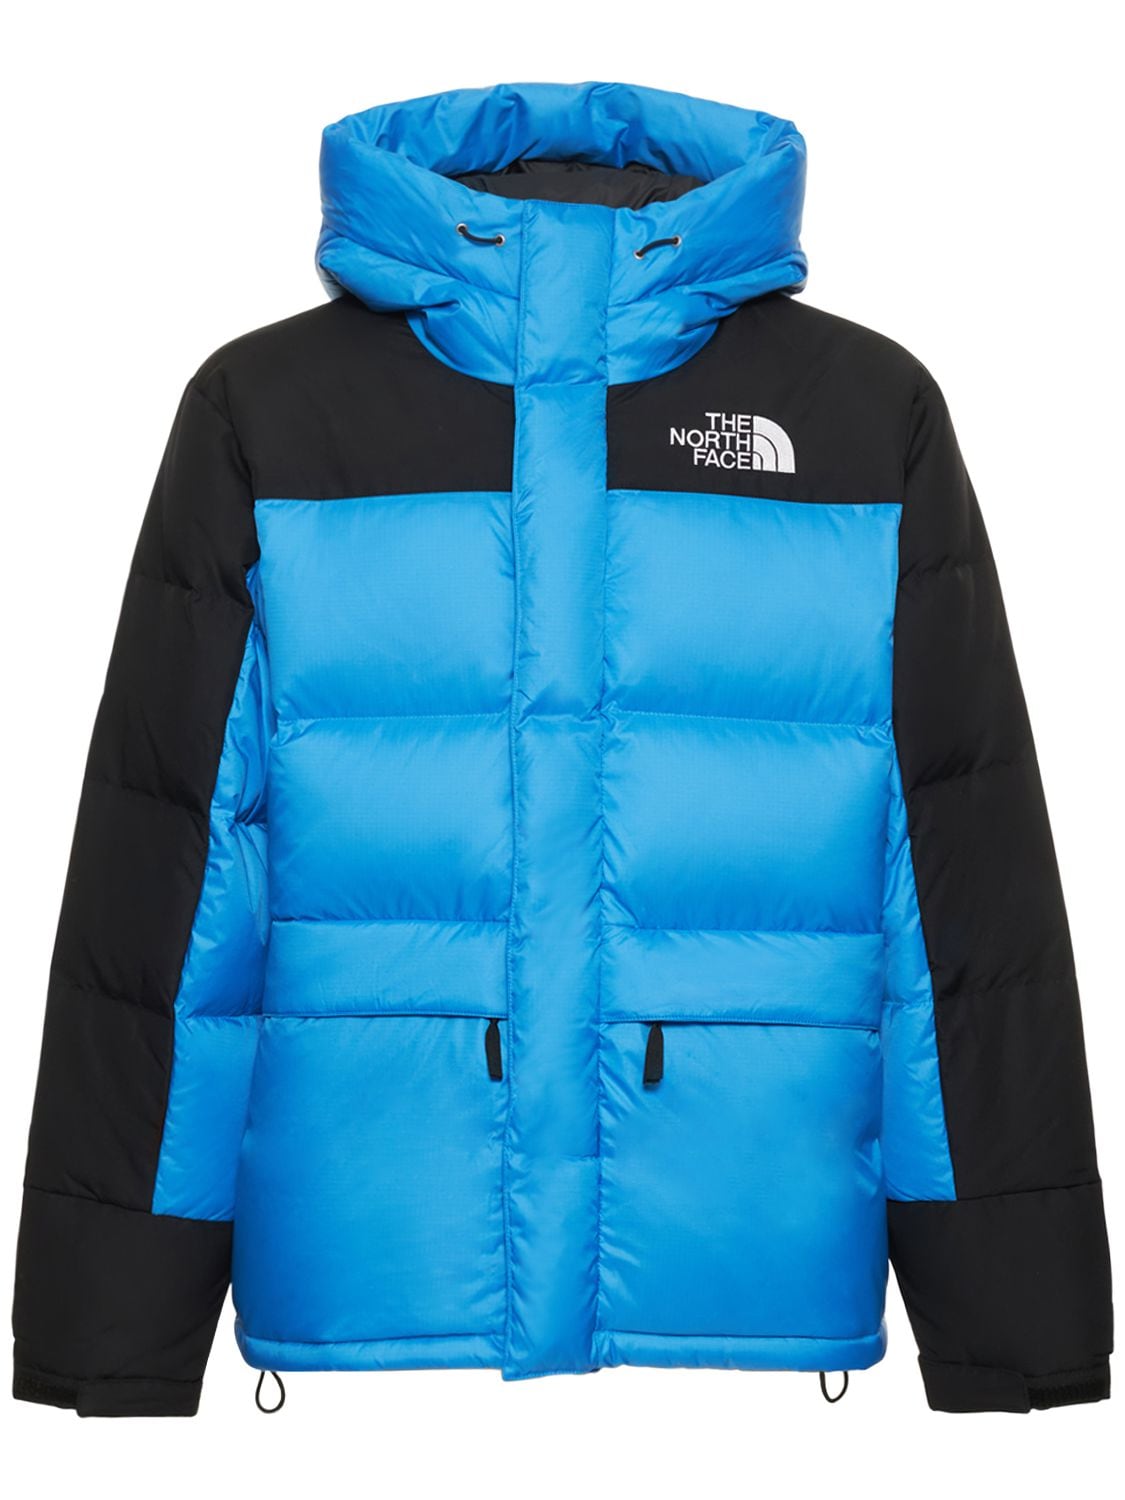 The North Face Himalayan Down Jacket In Supersonic Blue